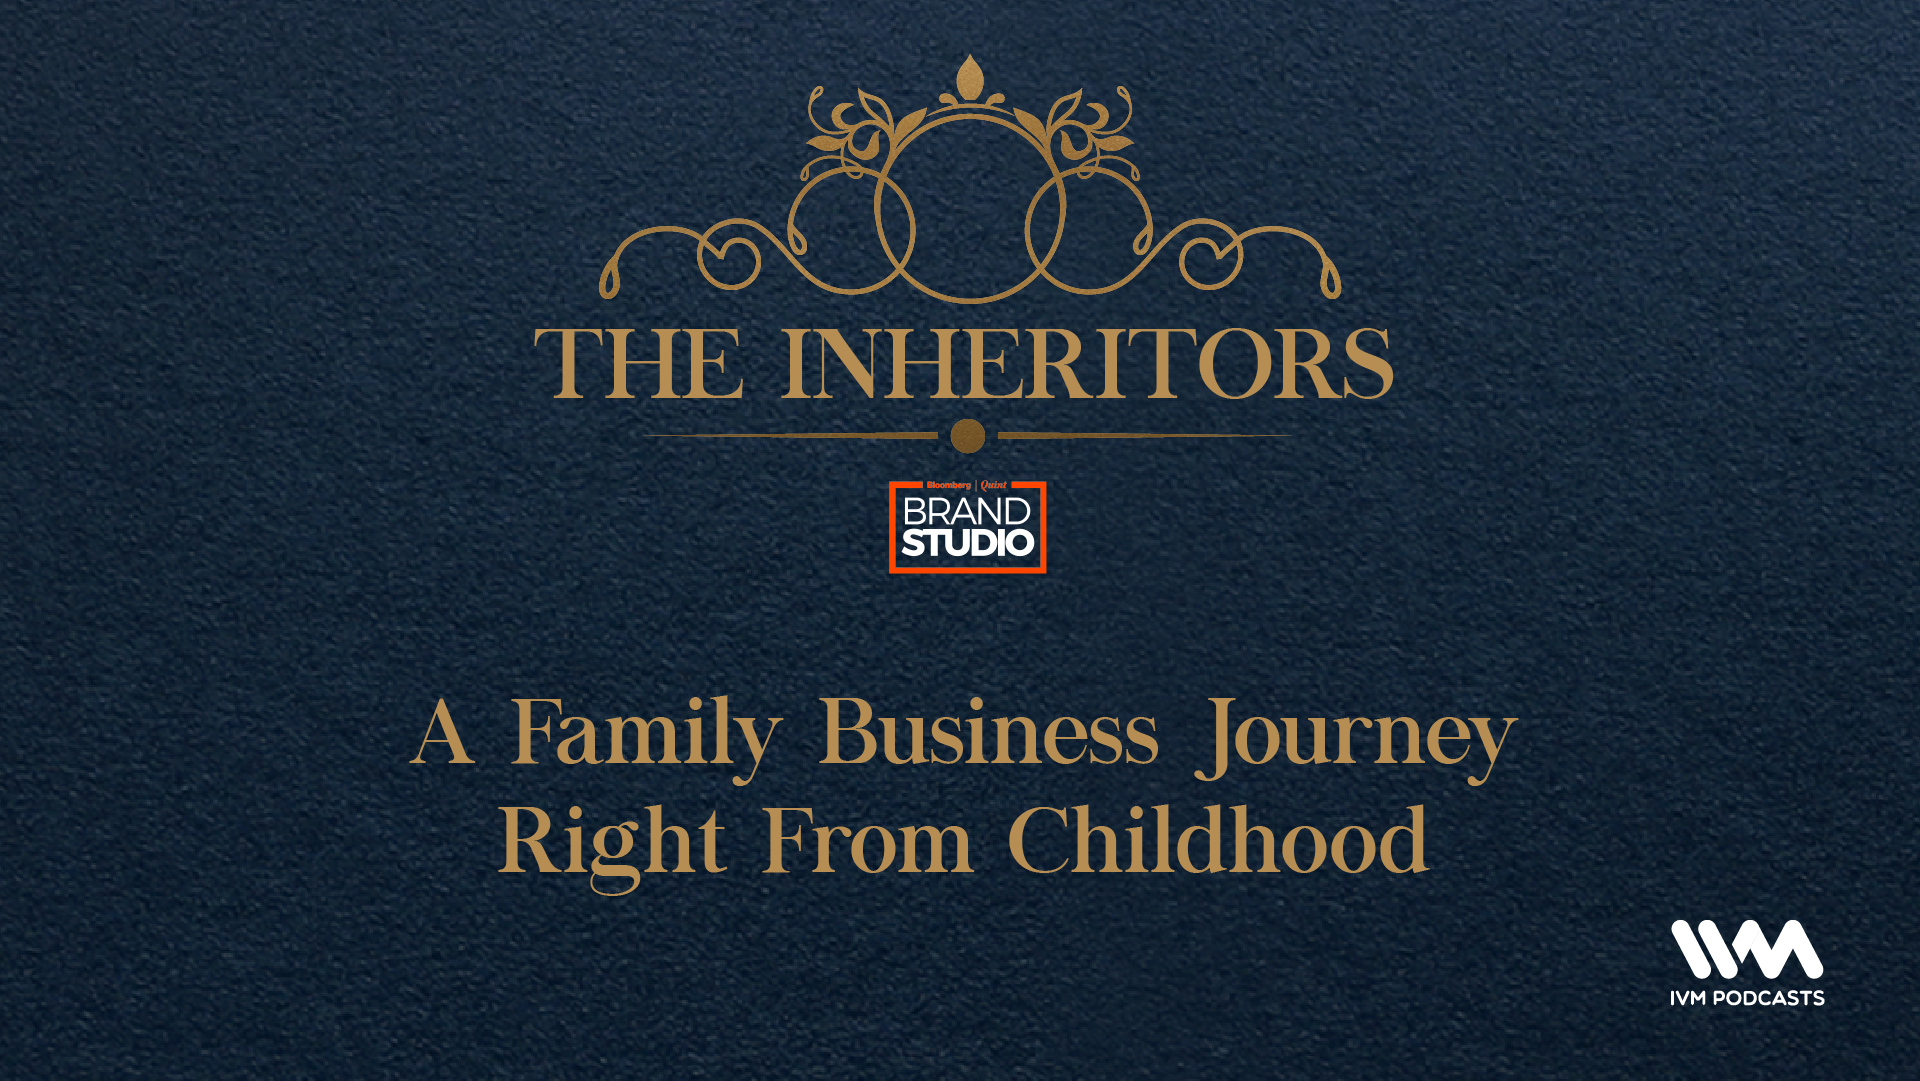 A Family Business Journey right from childhood